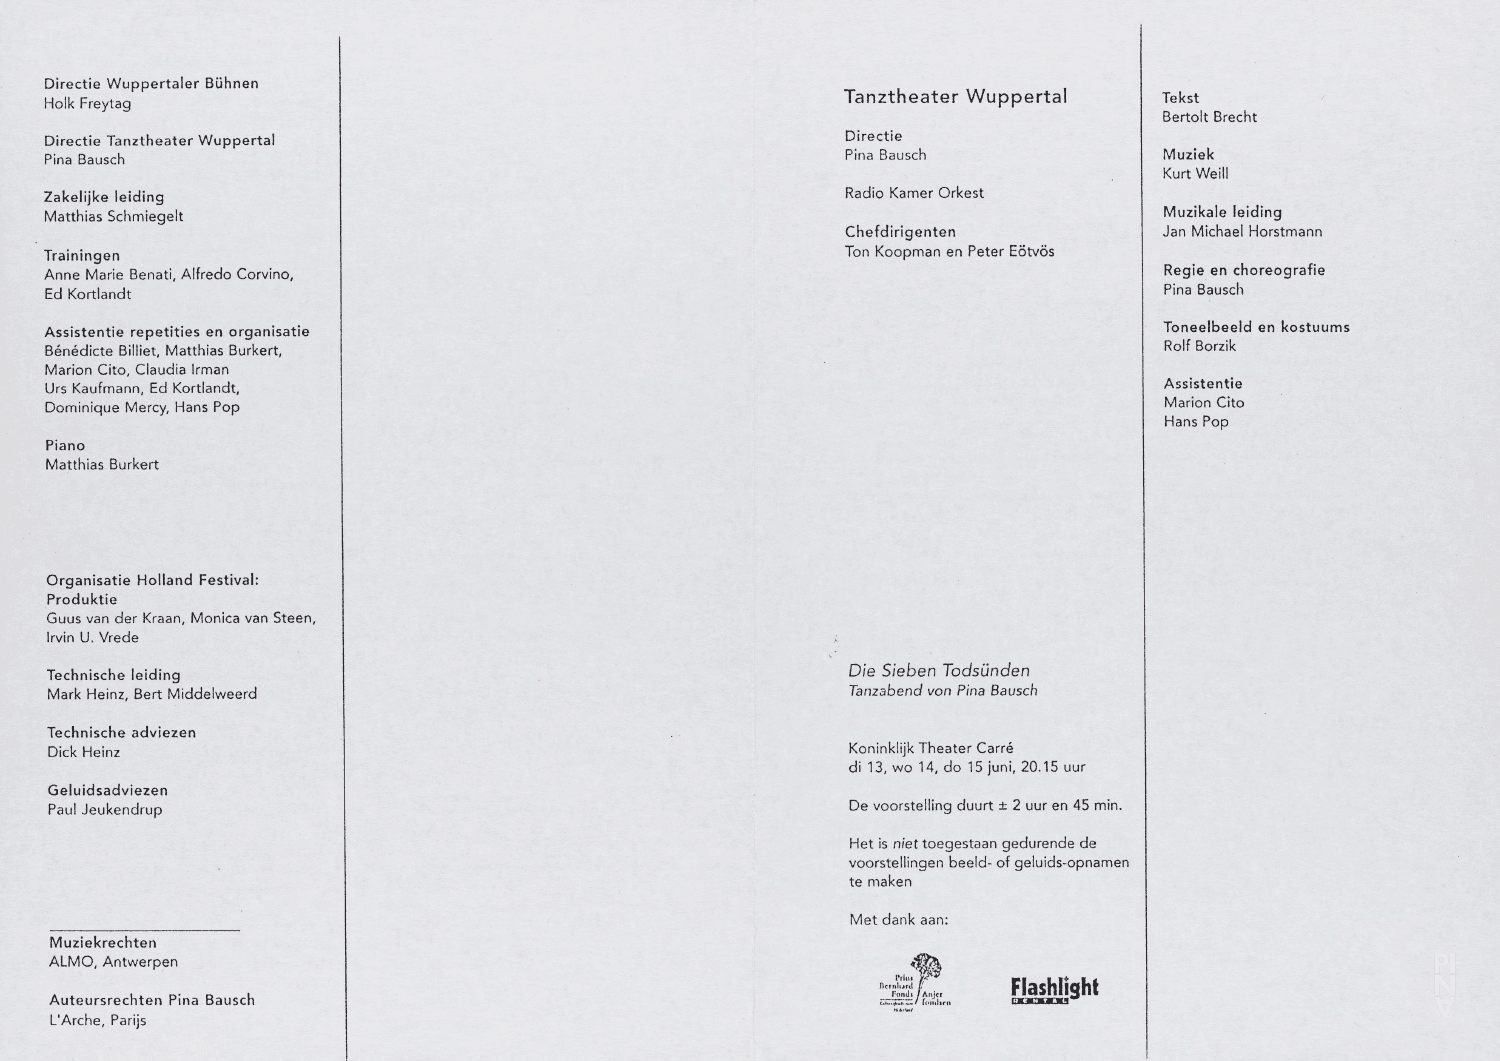 Evening leaflet for “The Seven Deadly Sins” by Pina Bausch with Tanztheater Wuppertal in in Amsterdam, 06/13/1995 – 06/15/1995